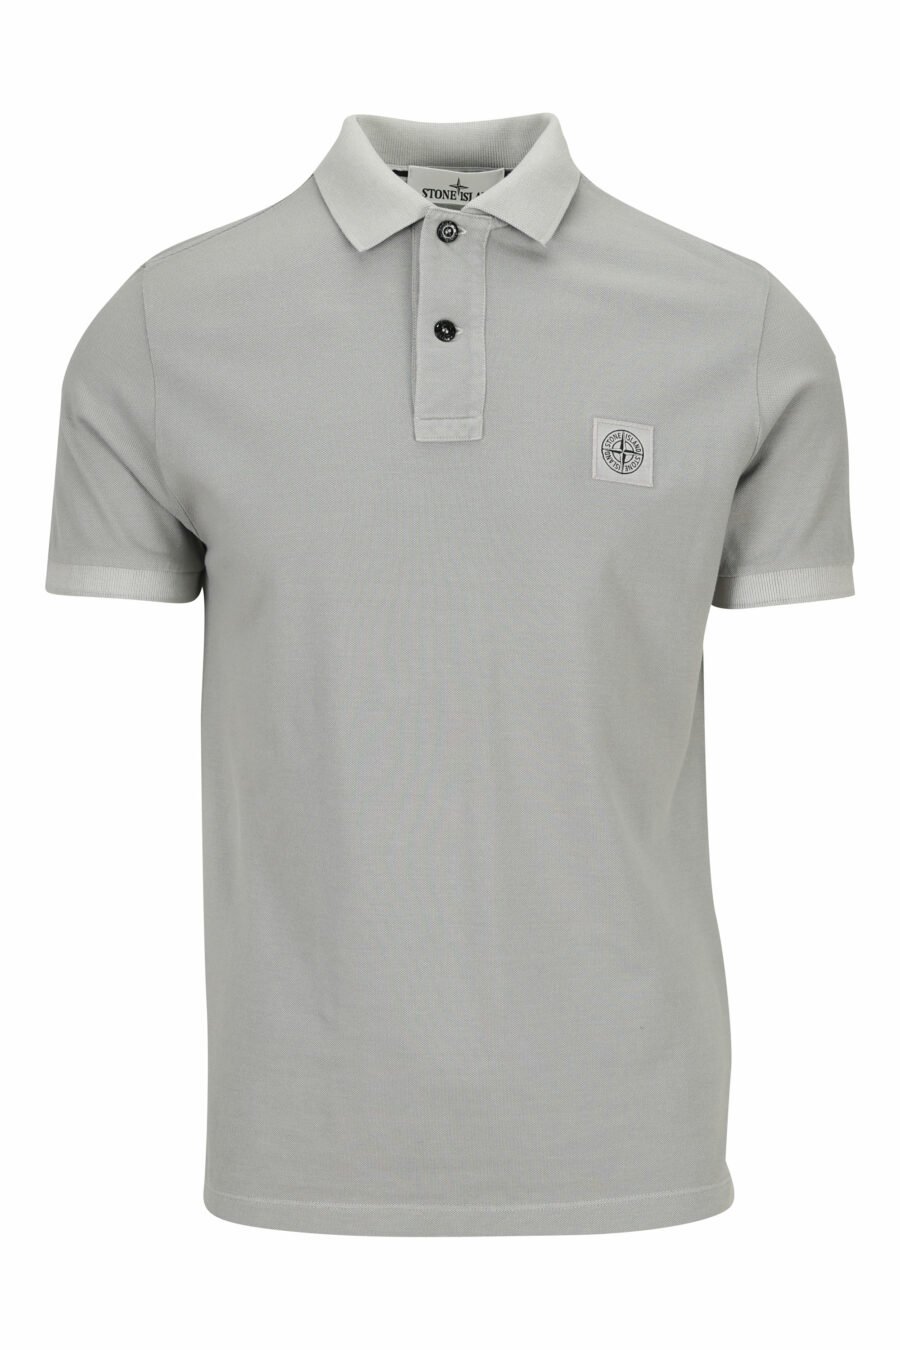 Grey slim fit polo shirt with mini logo compass patch - 8052572902451